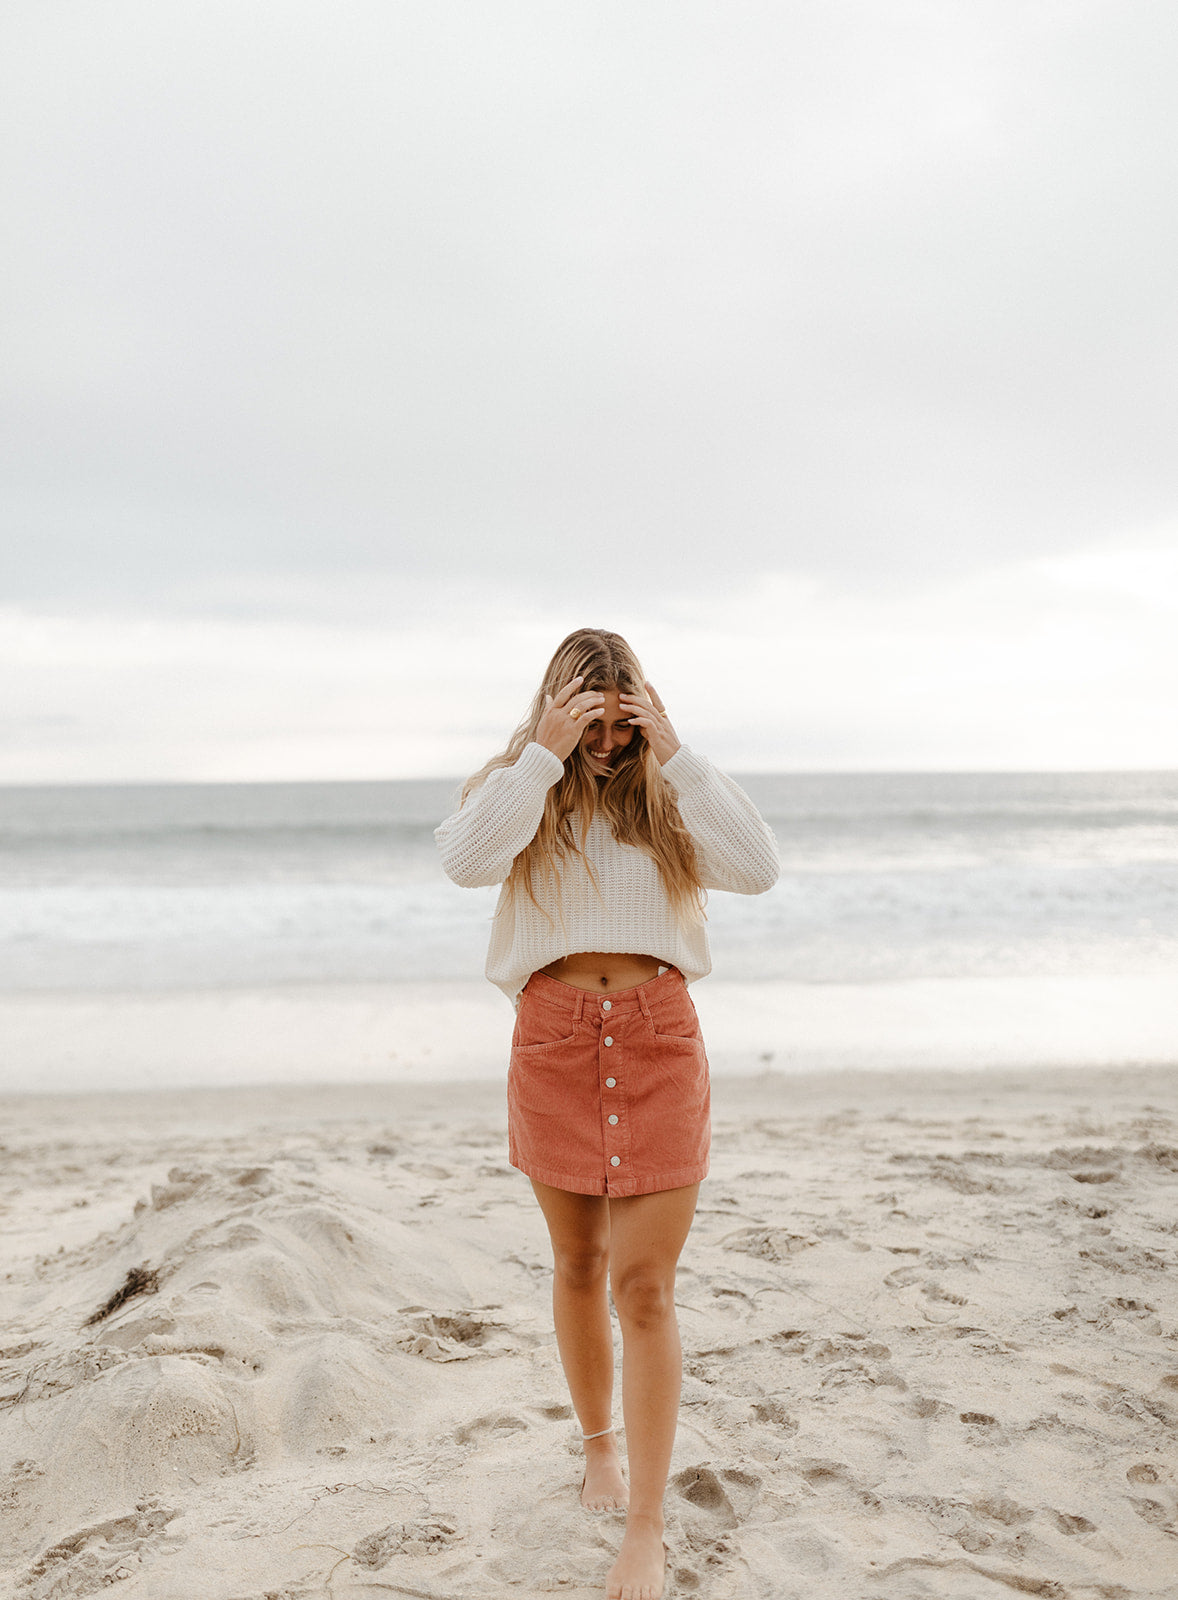 RAY CORD MINI SKIRT by Free People